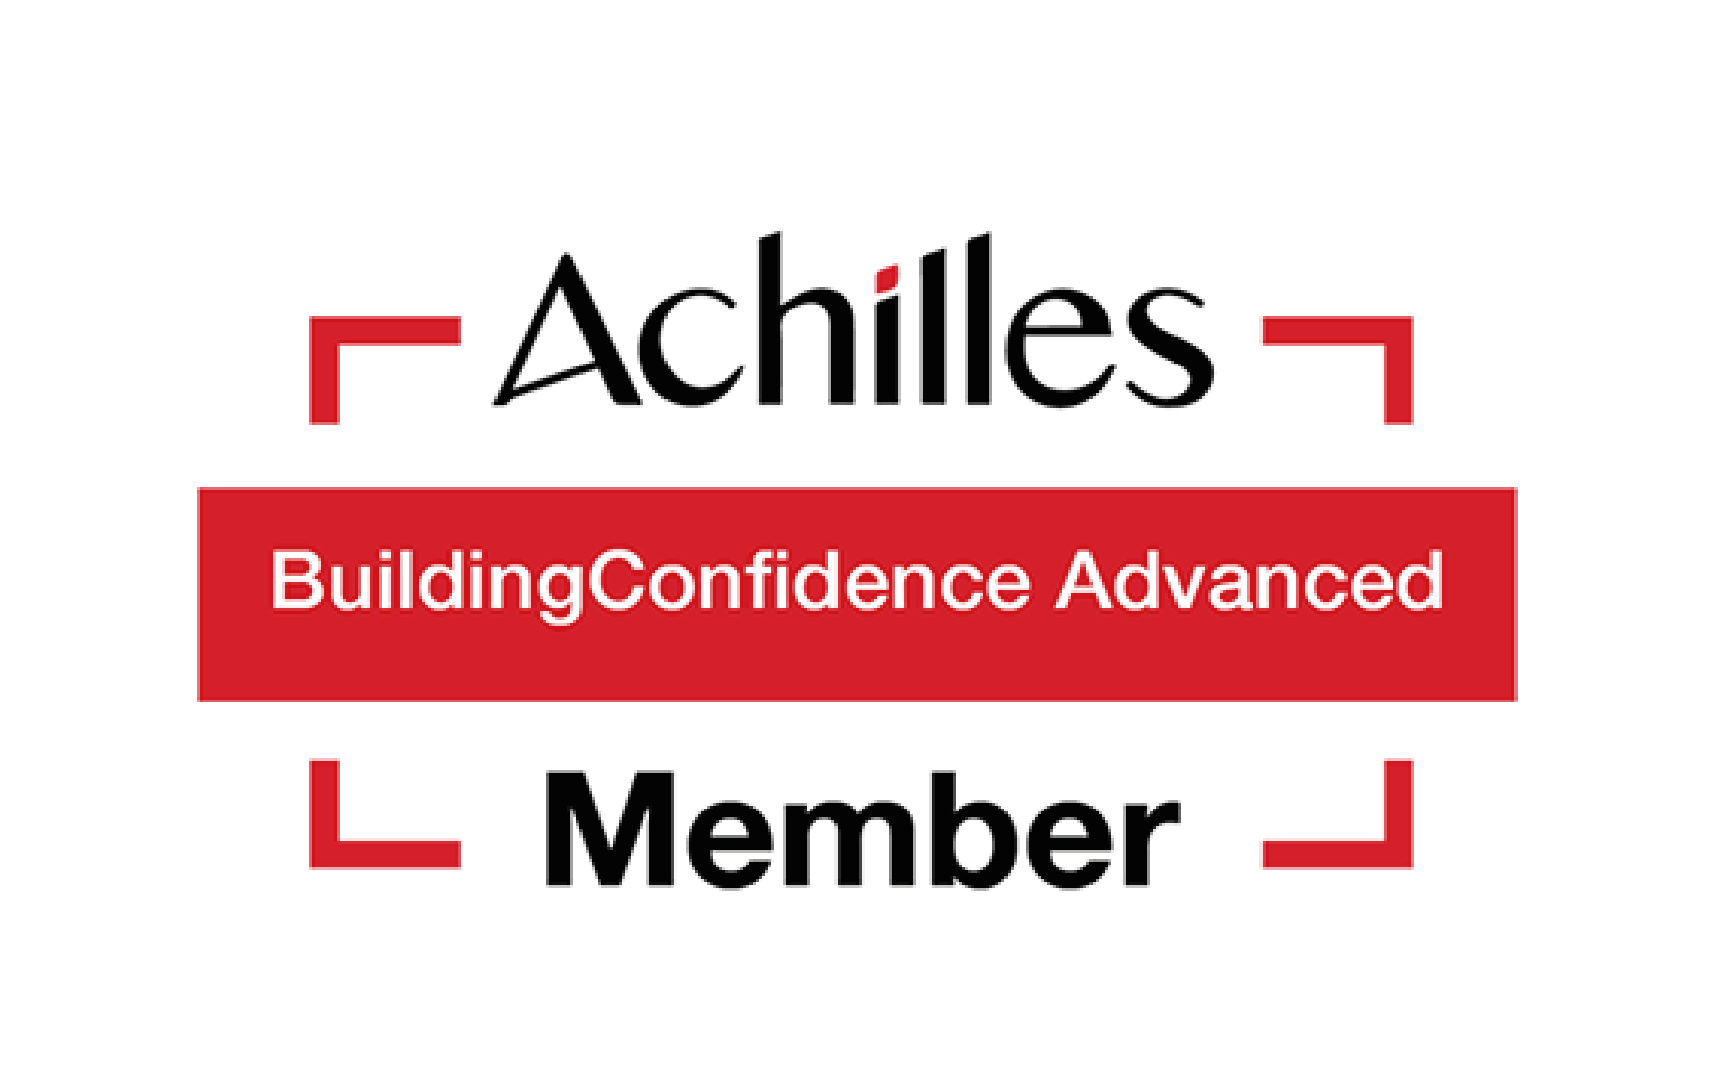 Guard Mark provides Accreditations & Memberships Of Achilles